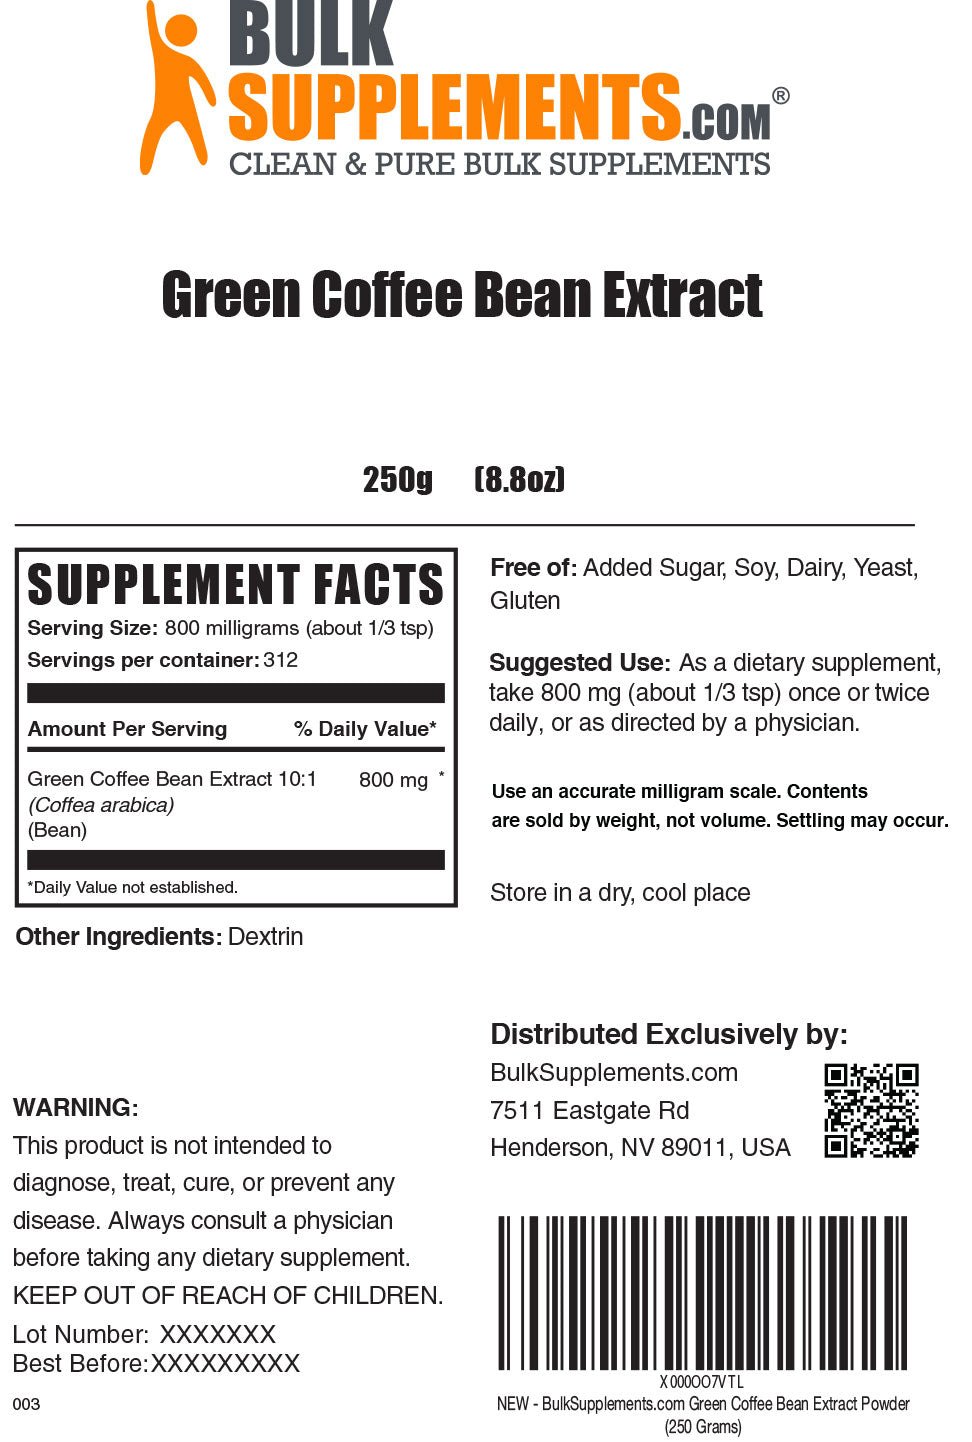 Green Coffee Bean extract powder label 250g